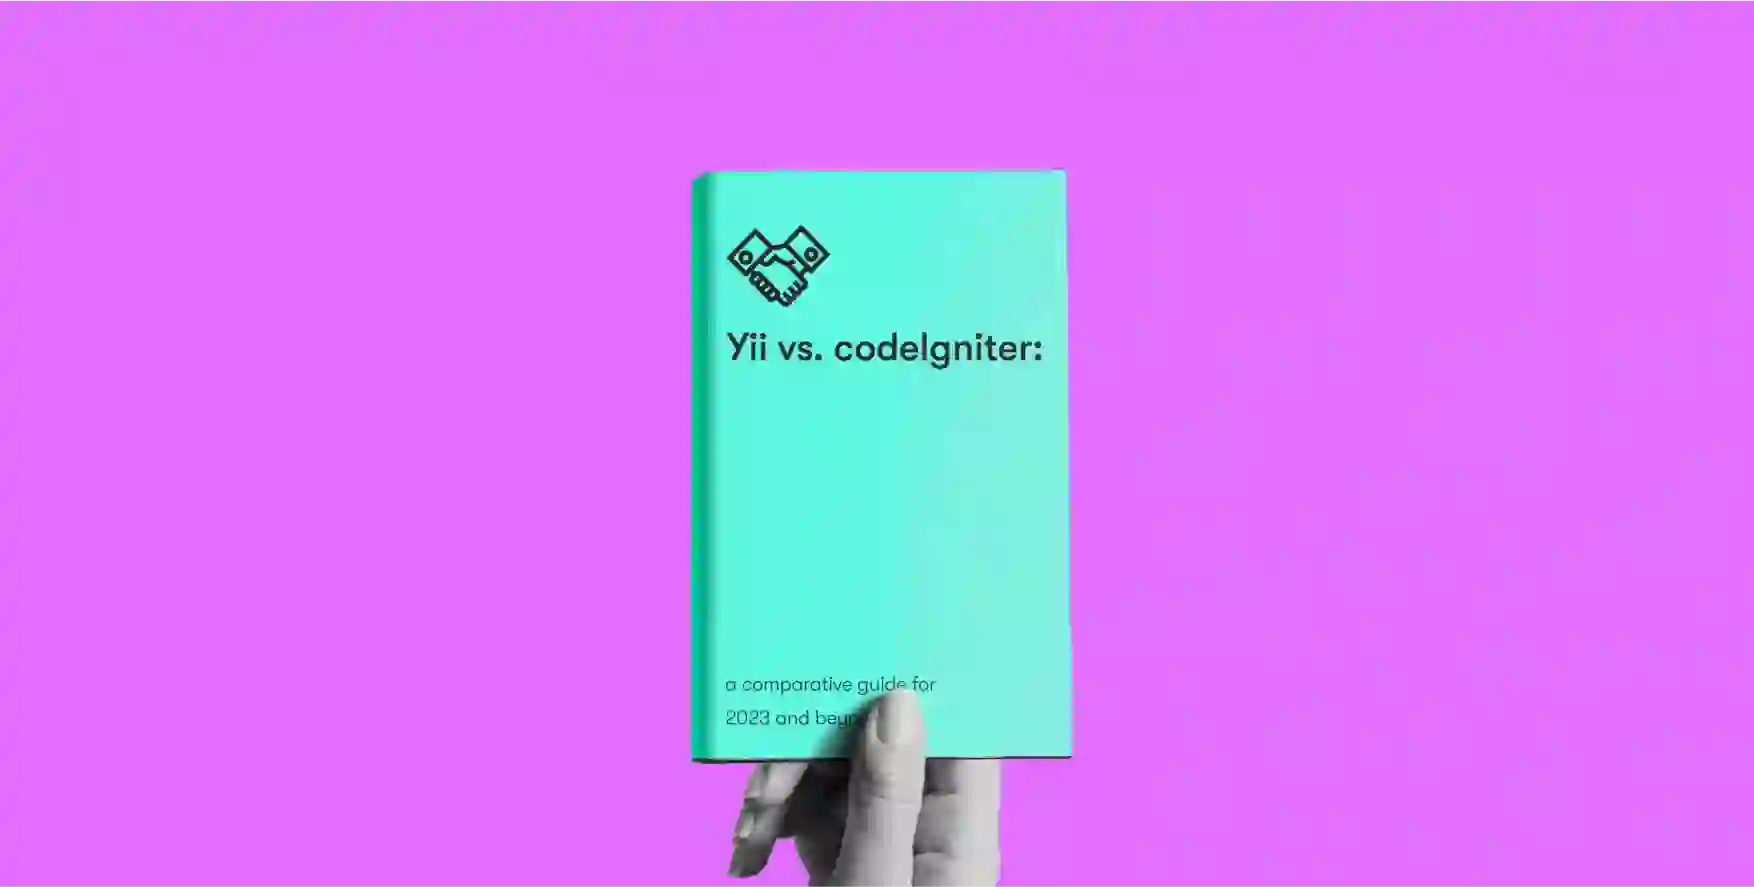 hand holding a book with a title Yii vs. CodeIgniter on purple background